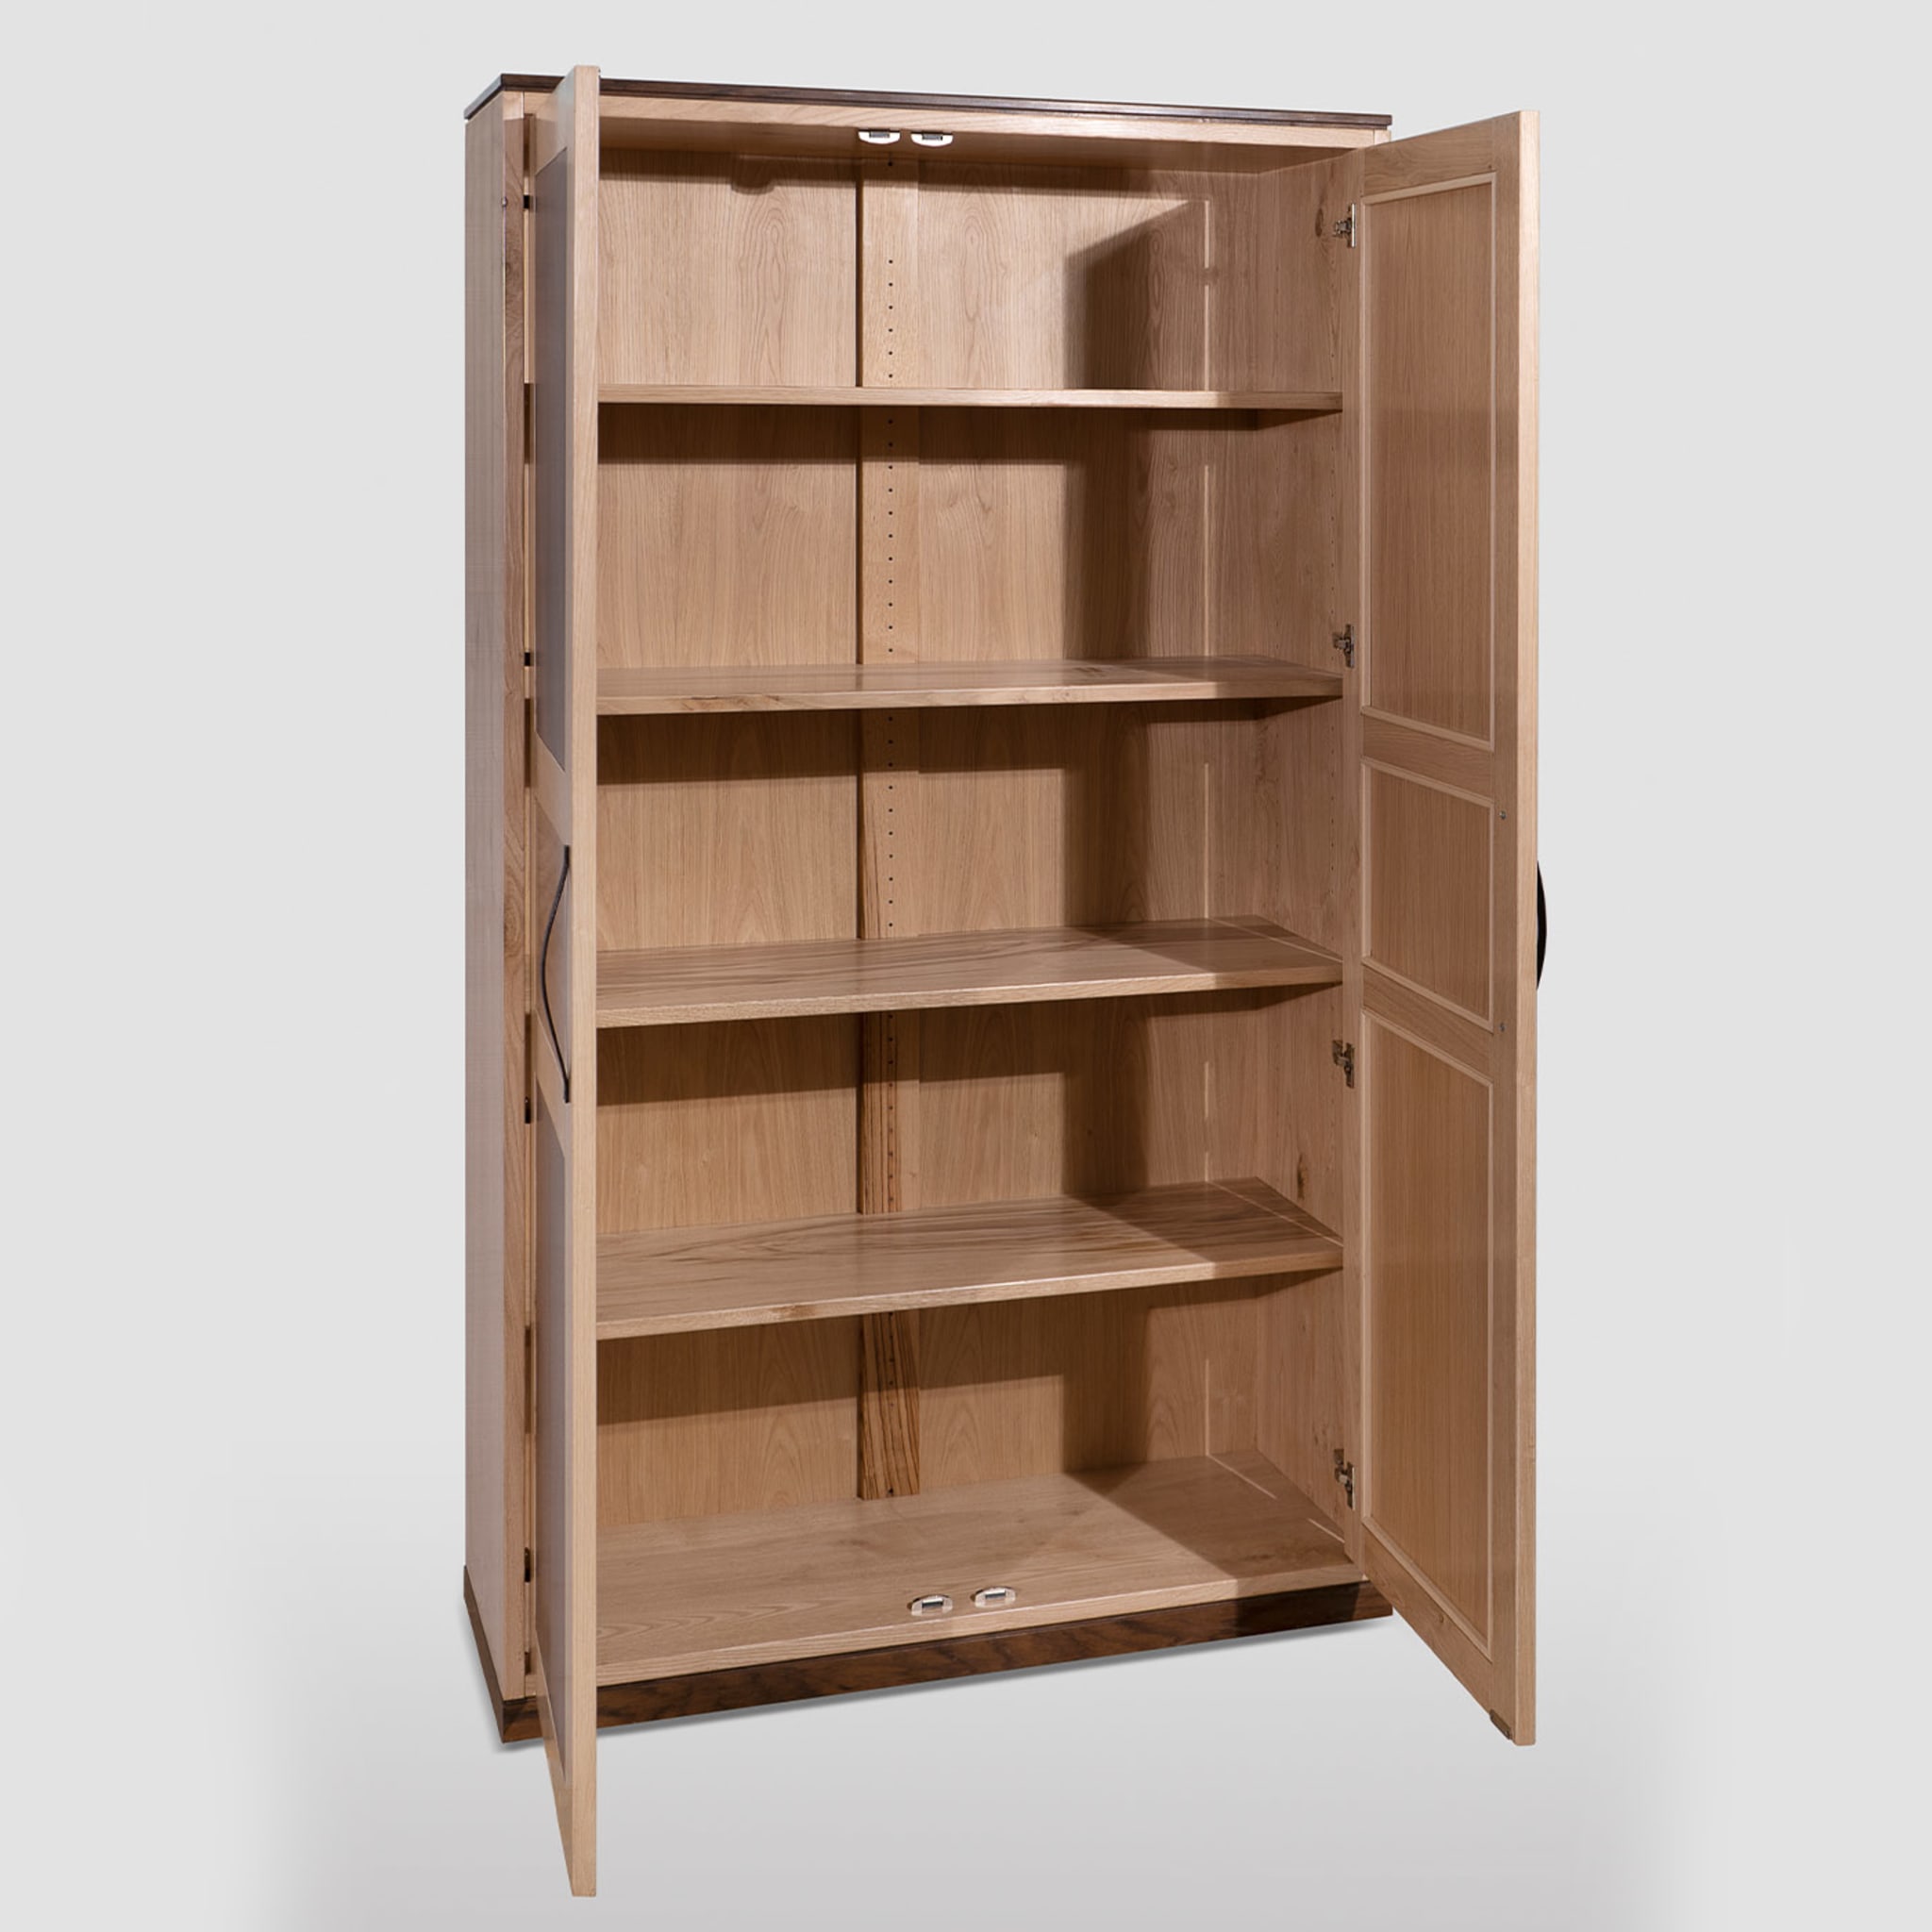 Mikael Two-Door Bookcase by Erika Gambella - Alternative view 4